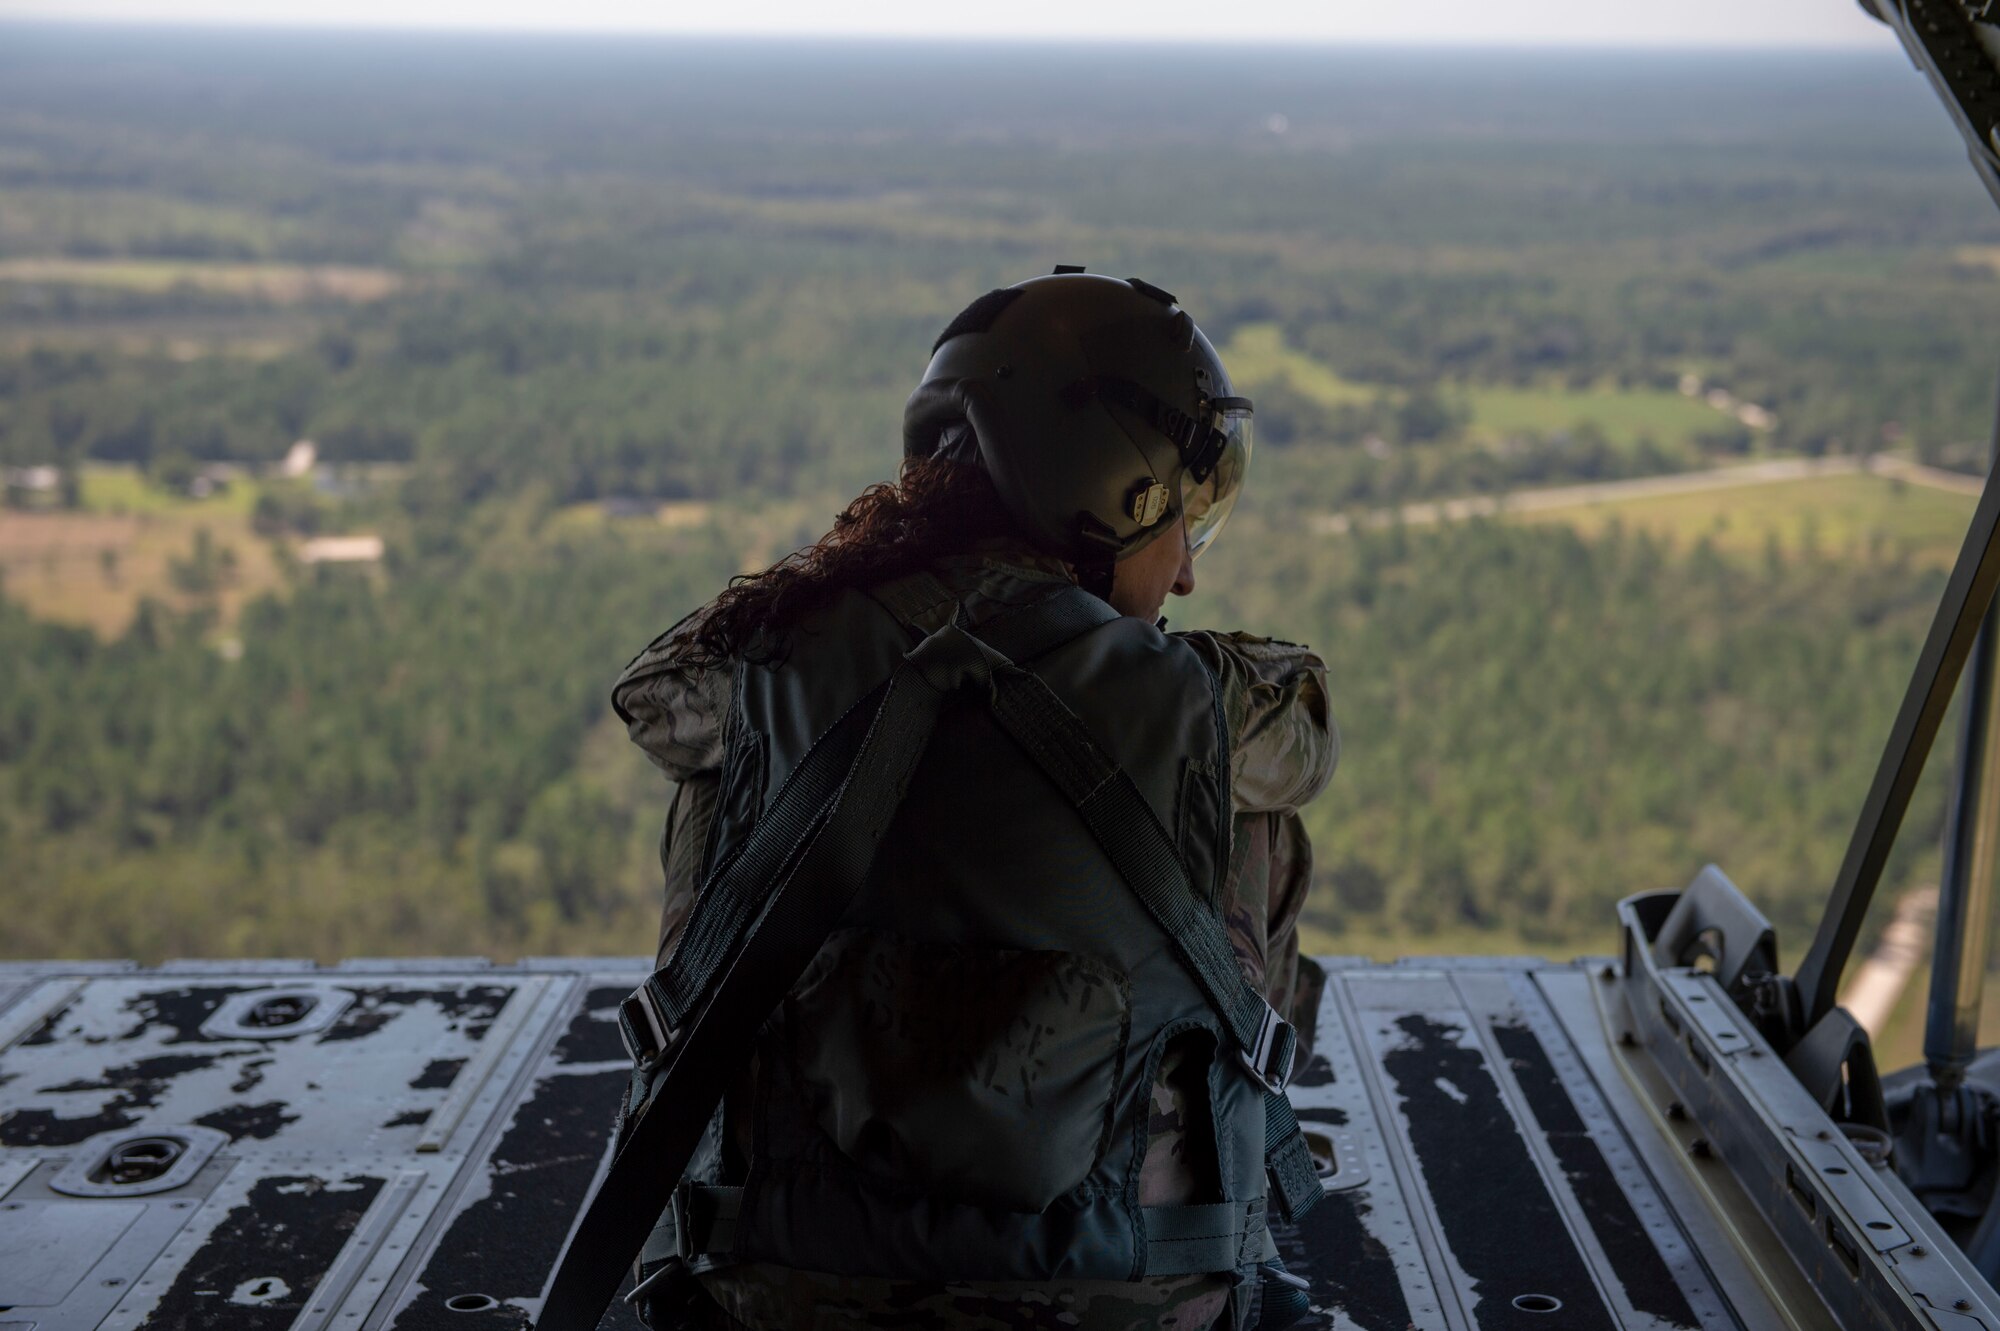 Tech. Sgt. Colleen McGahuey-Ramsey, 71st Rescue Squadron (RQS) loadmaster, looks out the back of an HC-130J Combat King II as it flies over south Georgia Sept. 6, 2019, at Moody Air Force Base, Ga. This was the first flight for the 71st RQS and the HC-130J Combat King II airframe to be operated by an all female aircrew. The 71st RQS provides rapidly deployable, expeditionary personnel recovery forces for theater commanders for contingency and crisis response operations worldwide. (U.S. Air Force photo by 2nd Lt. Kaylin P. Hankerson)